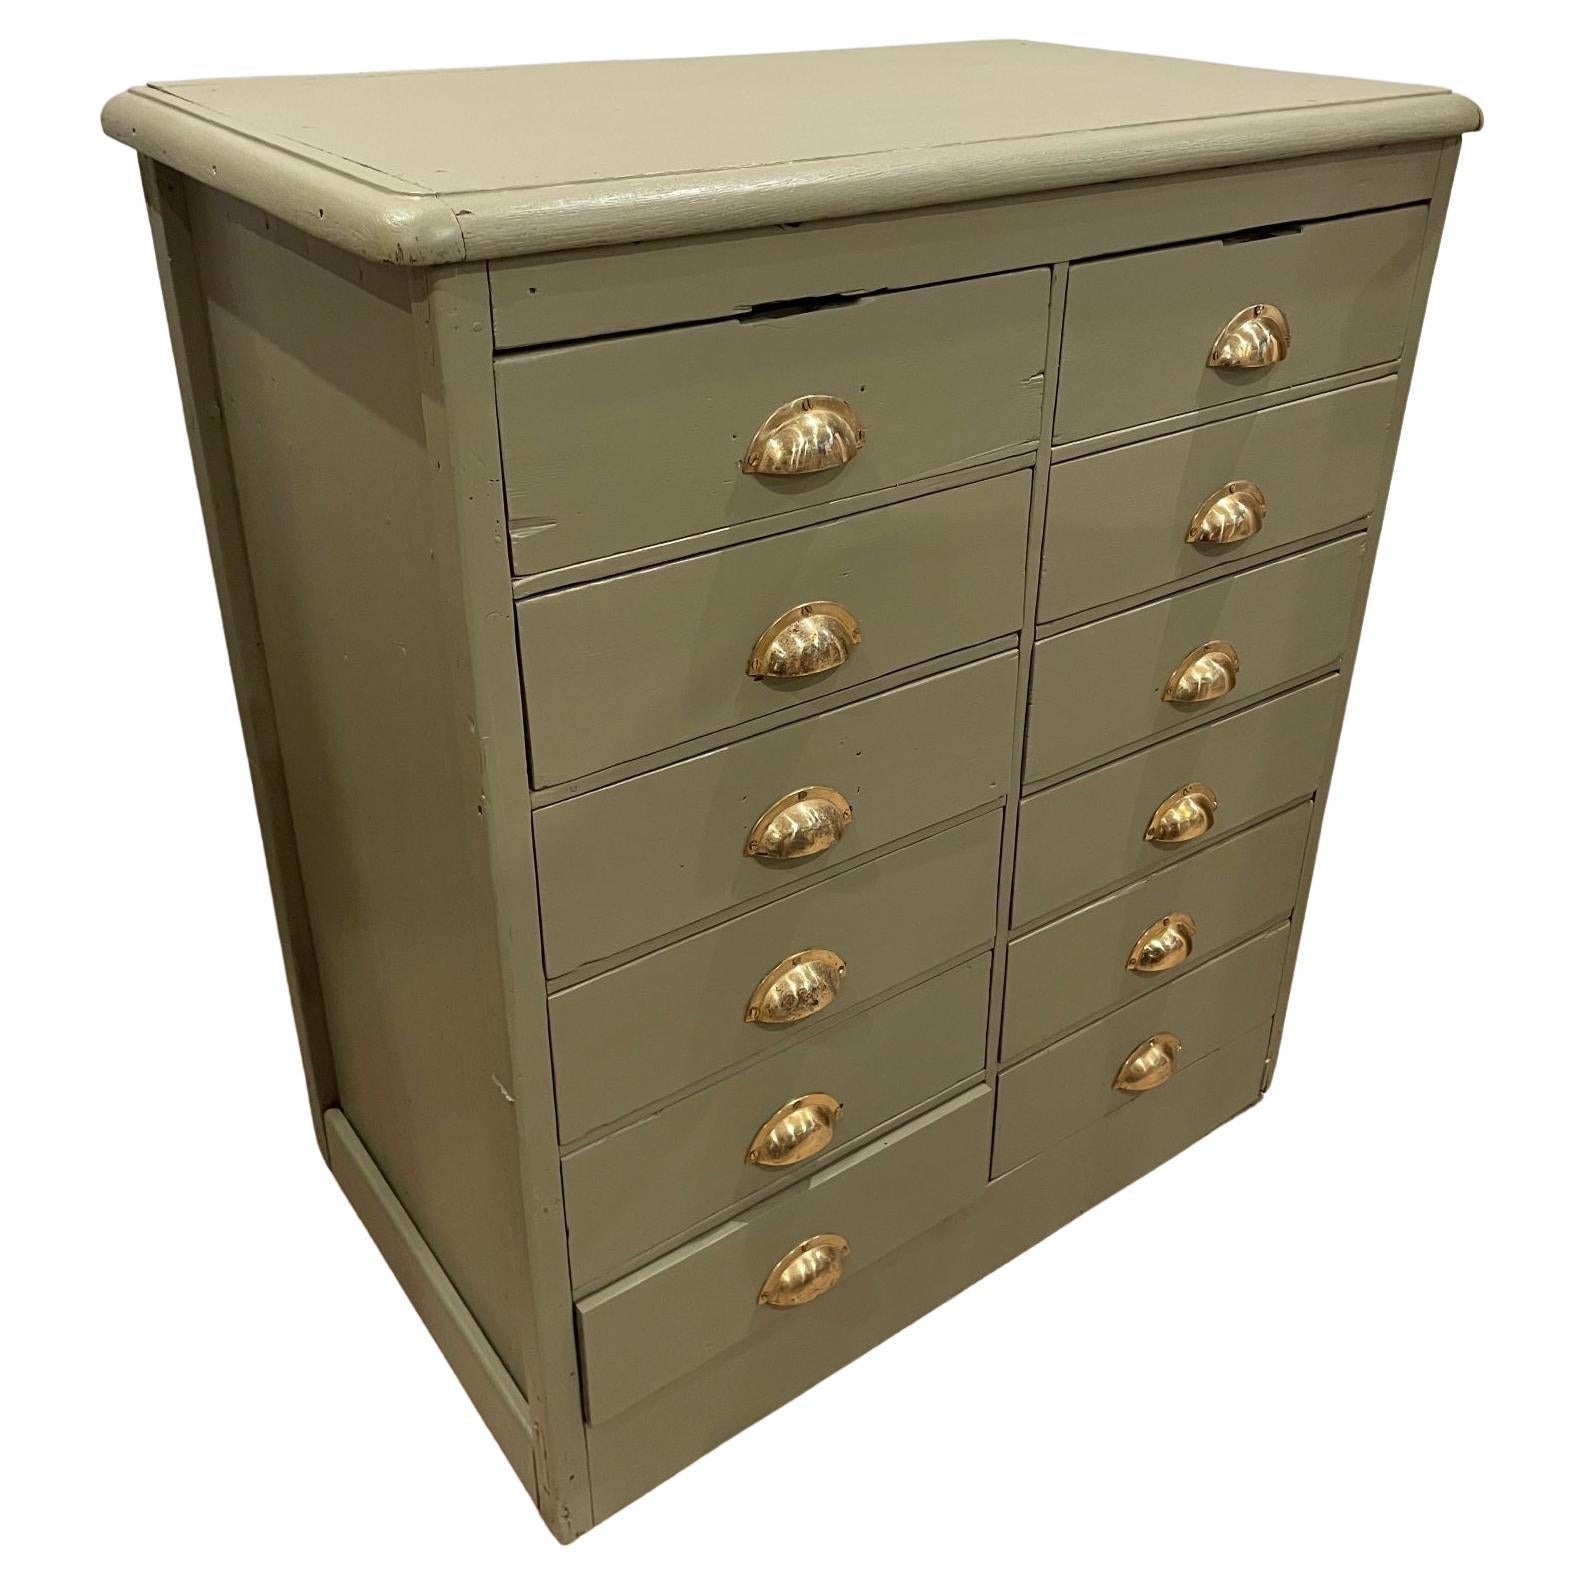 20th Century French Painted Fir Chests of Drawers, 1920s